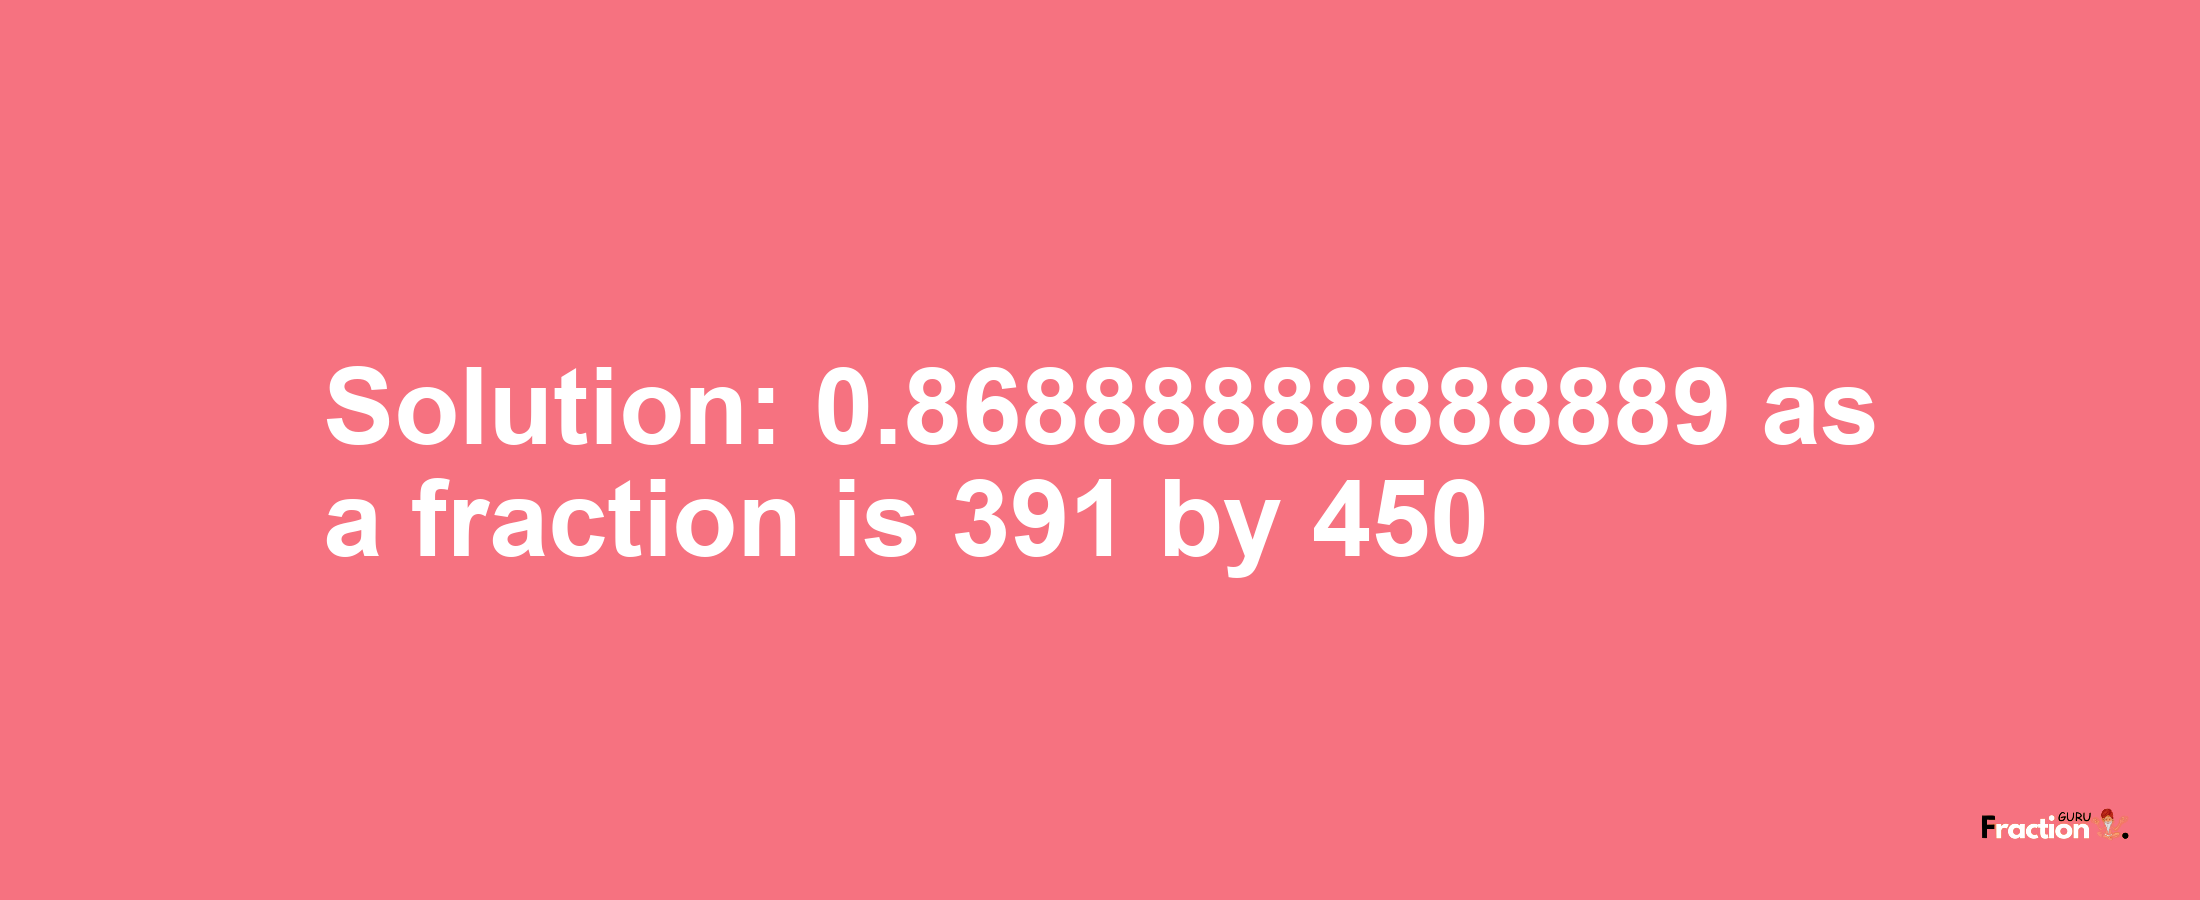 Solution:0.86888888888889 as a fraction is 391/450